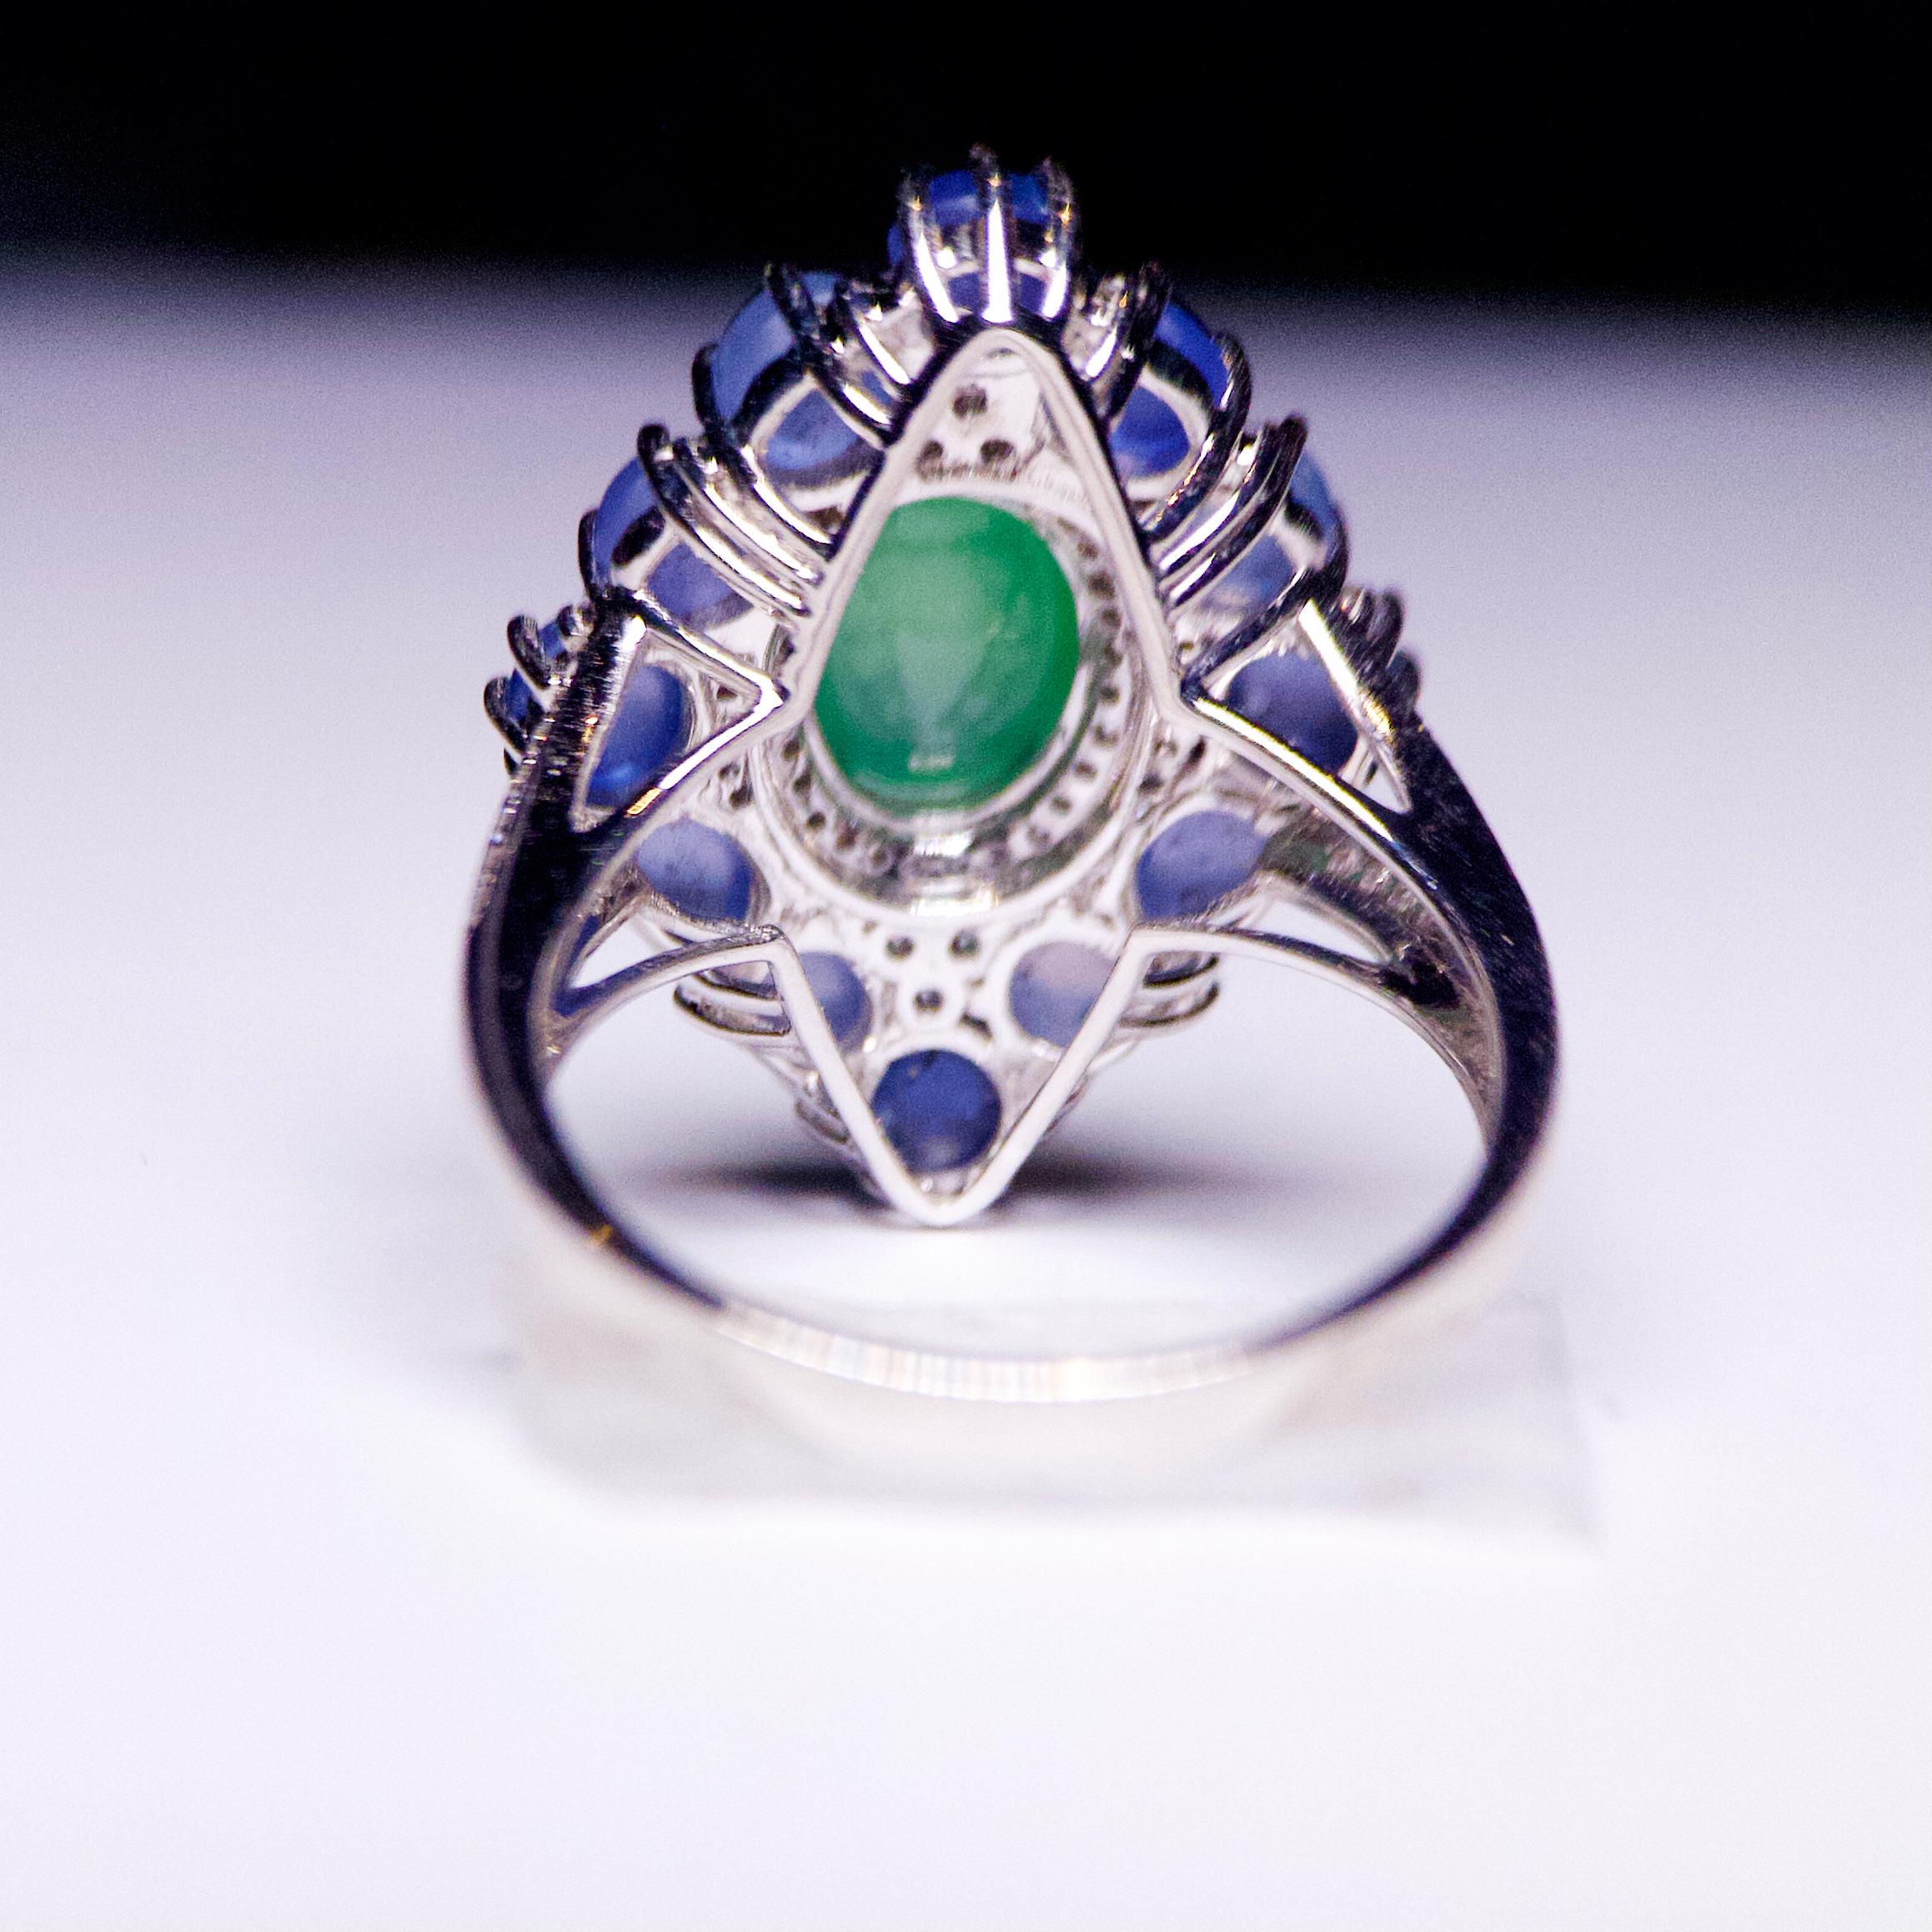 This is a kite-shape ring with Green Jadeite and Blue Star Sapphire. The apple green Jadeite is situated in the middle of the ring with diamond pave surrounded it. On the oter layer, there are 12 Blue Star Sapphire cabochon in different shades. It